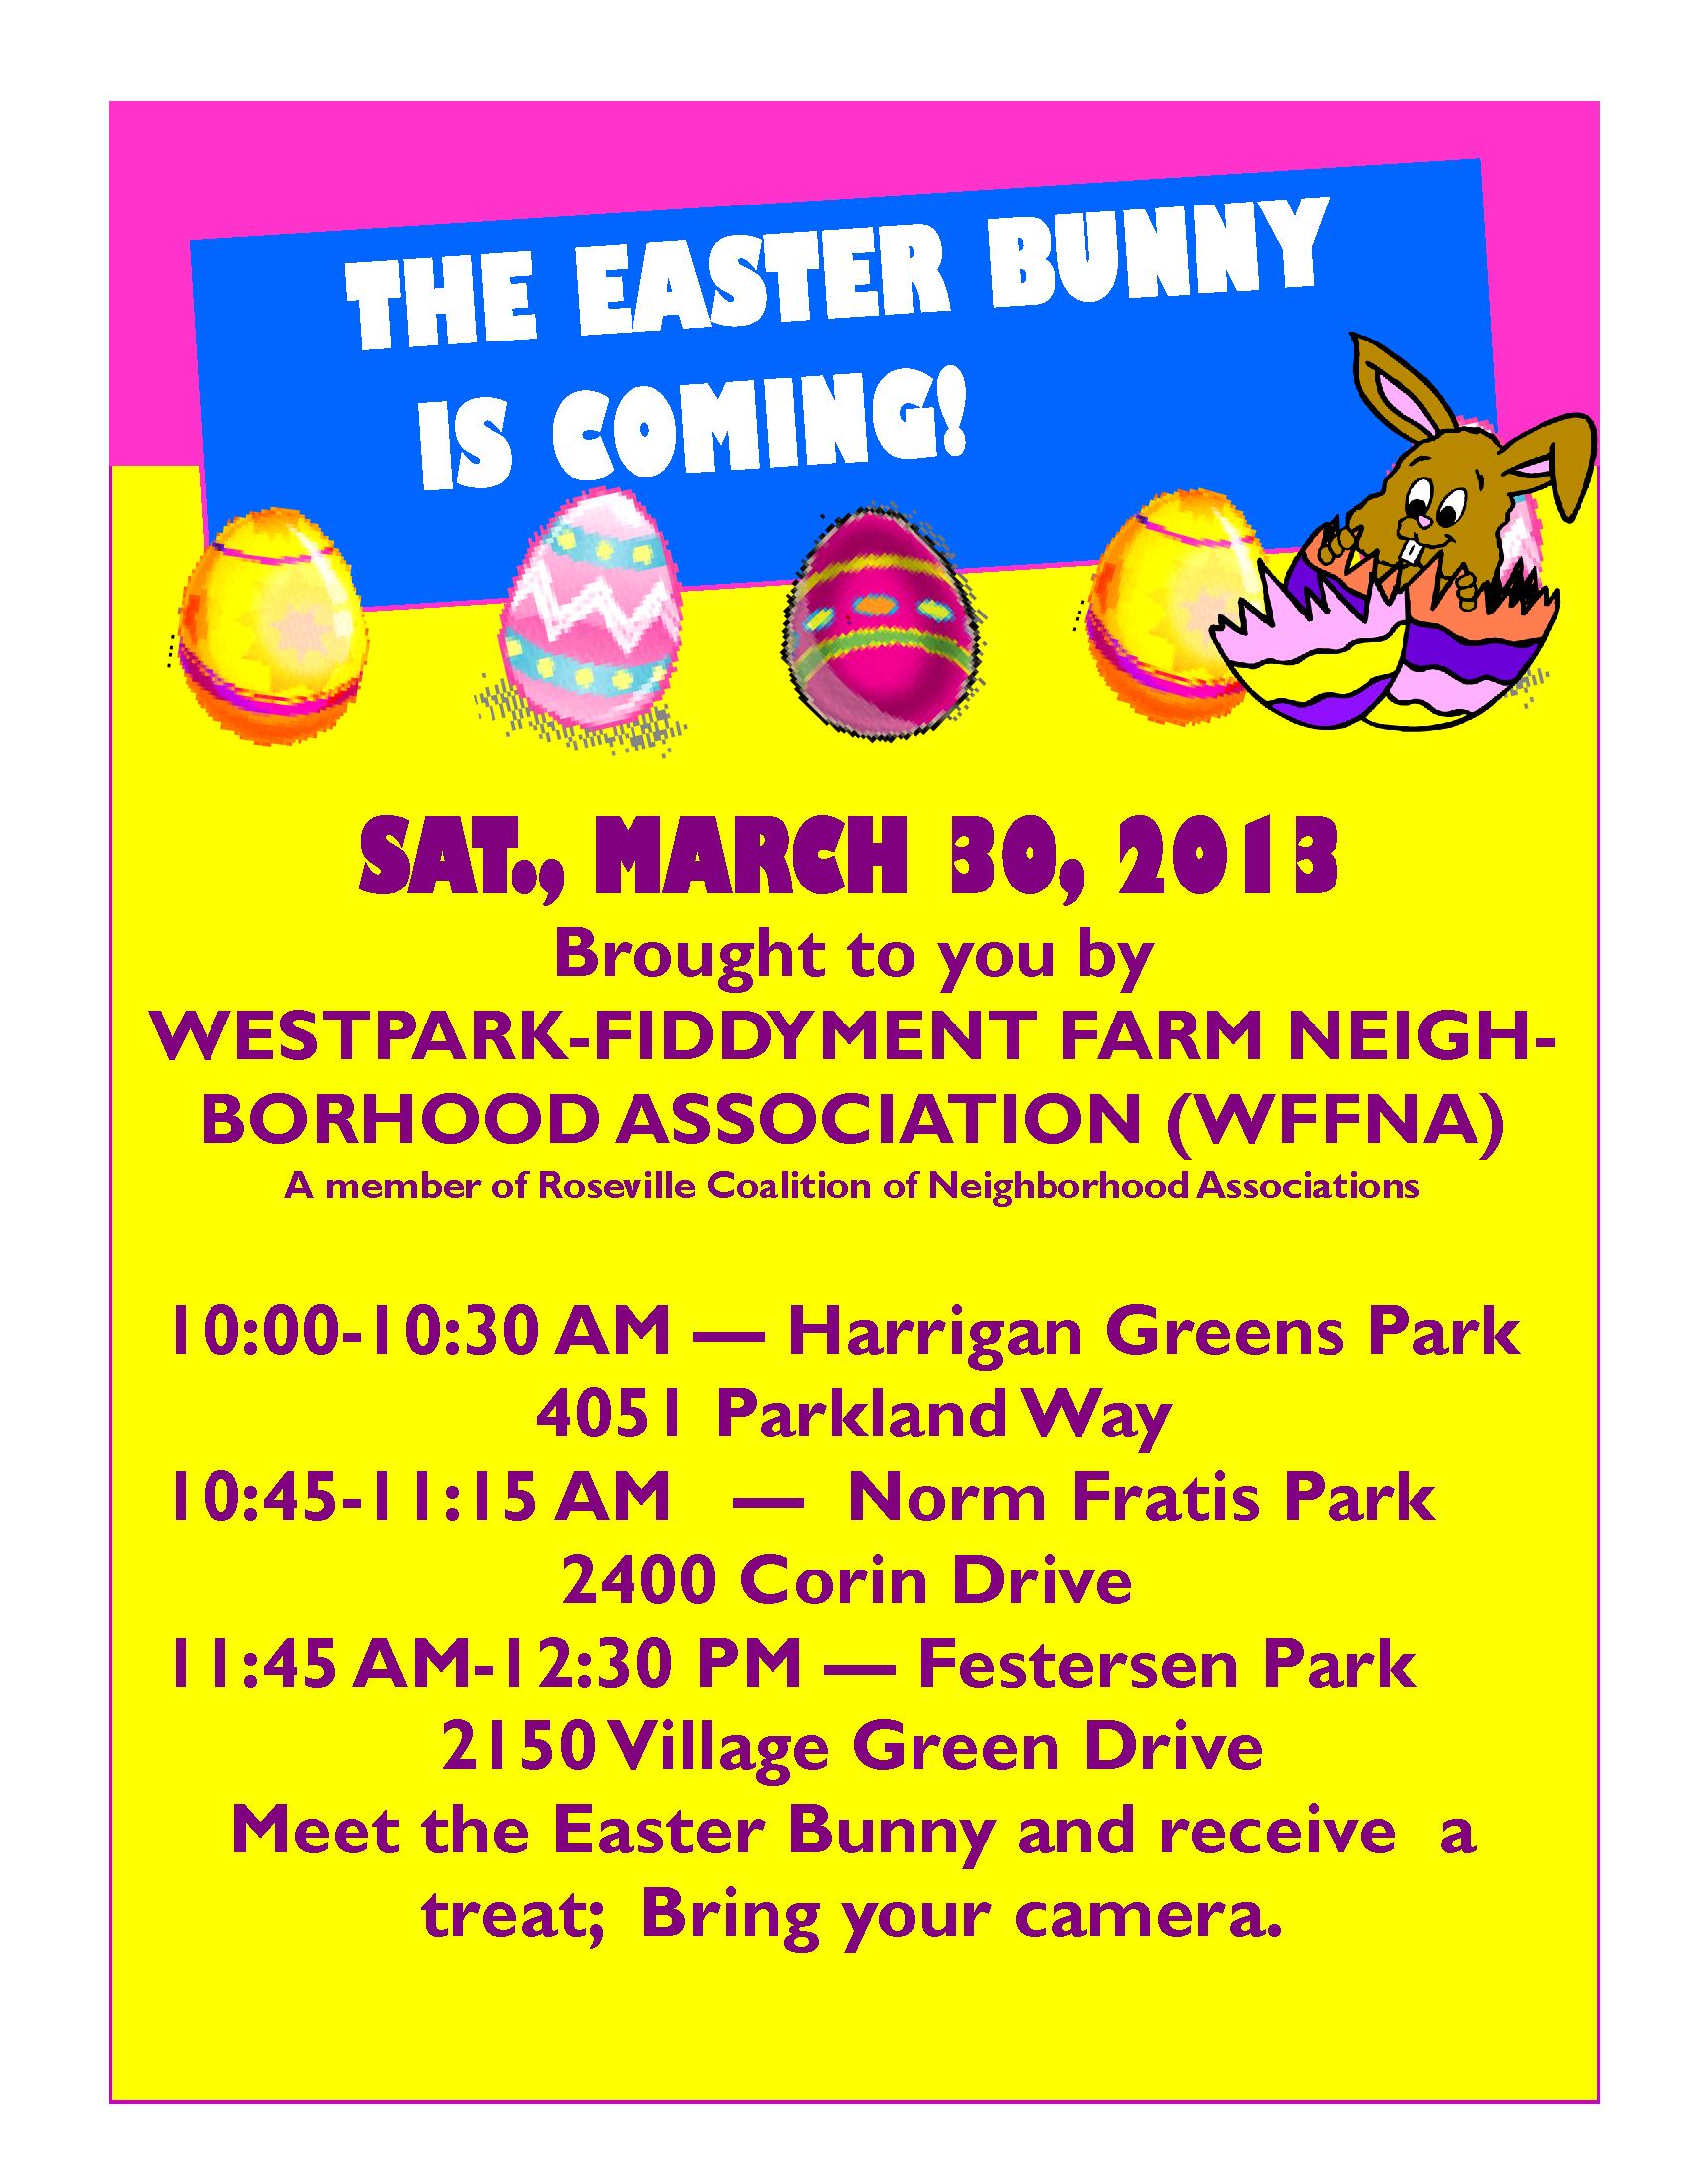 More information about "Meet the Easter Bunny"